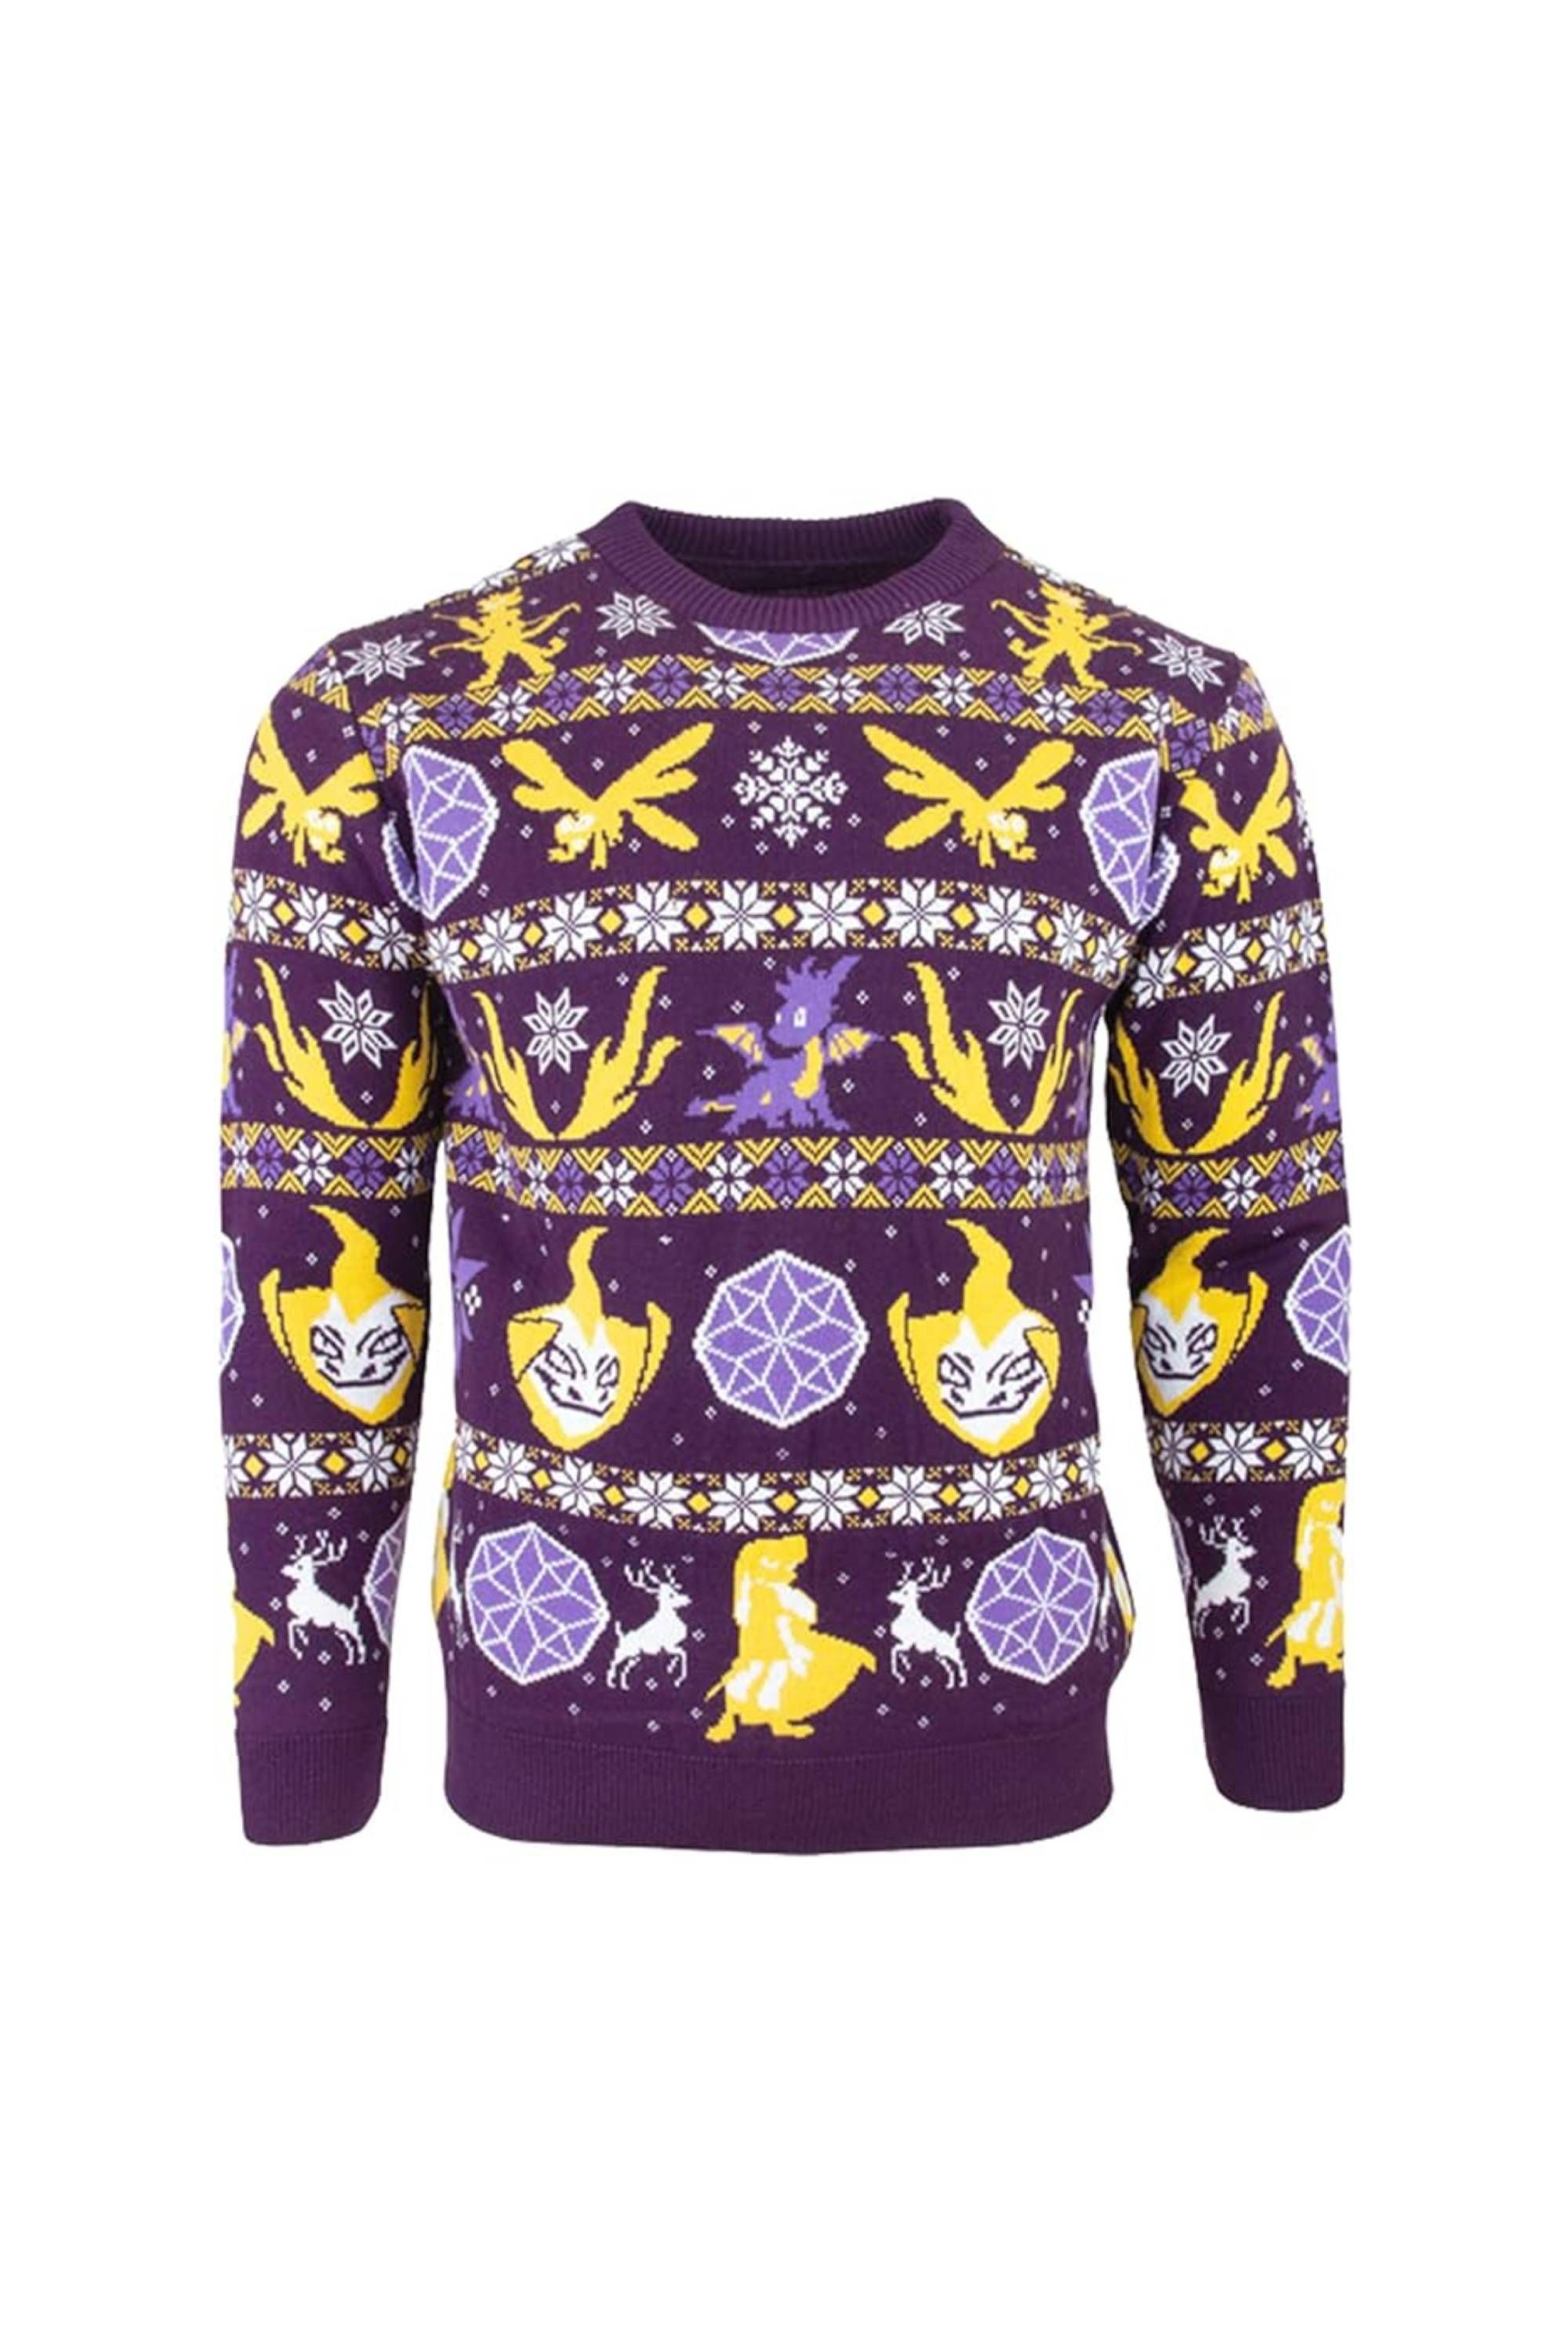 Numskull Official Spyro the Dragon Ugly Christmas Sweater